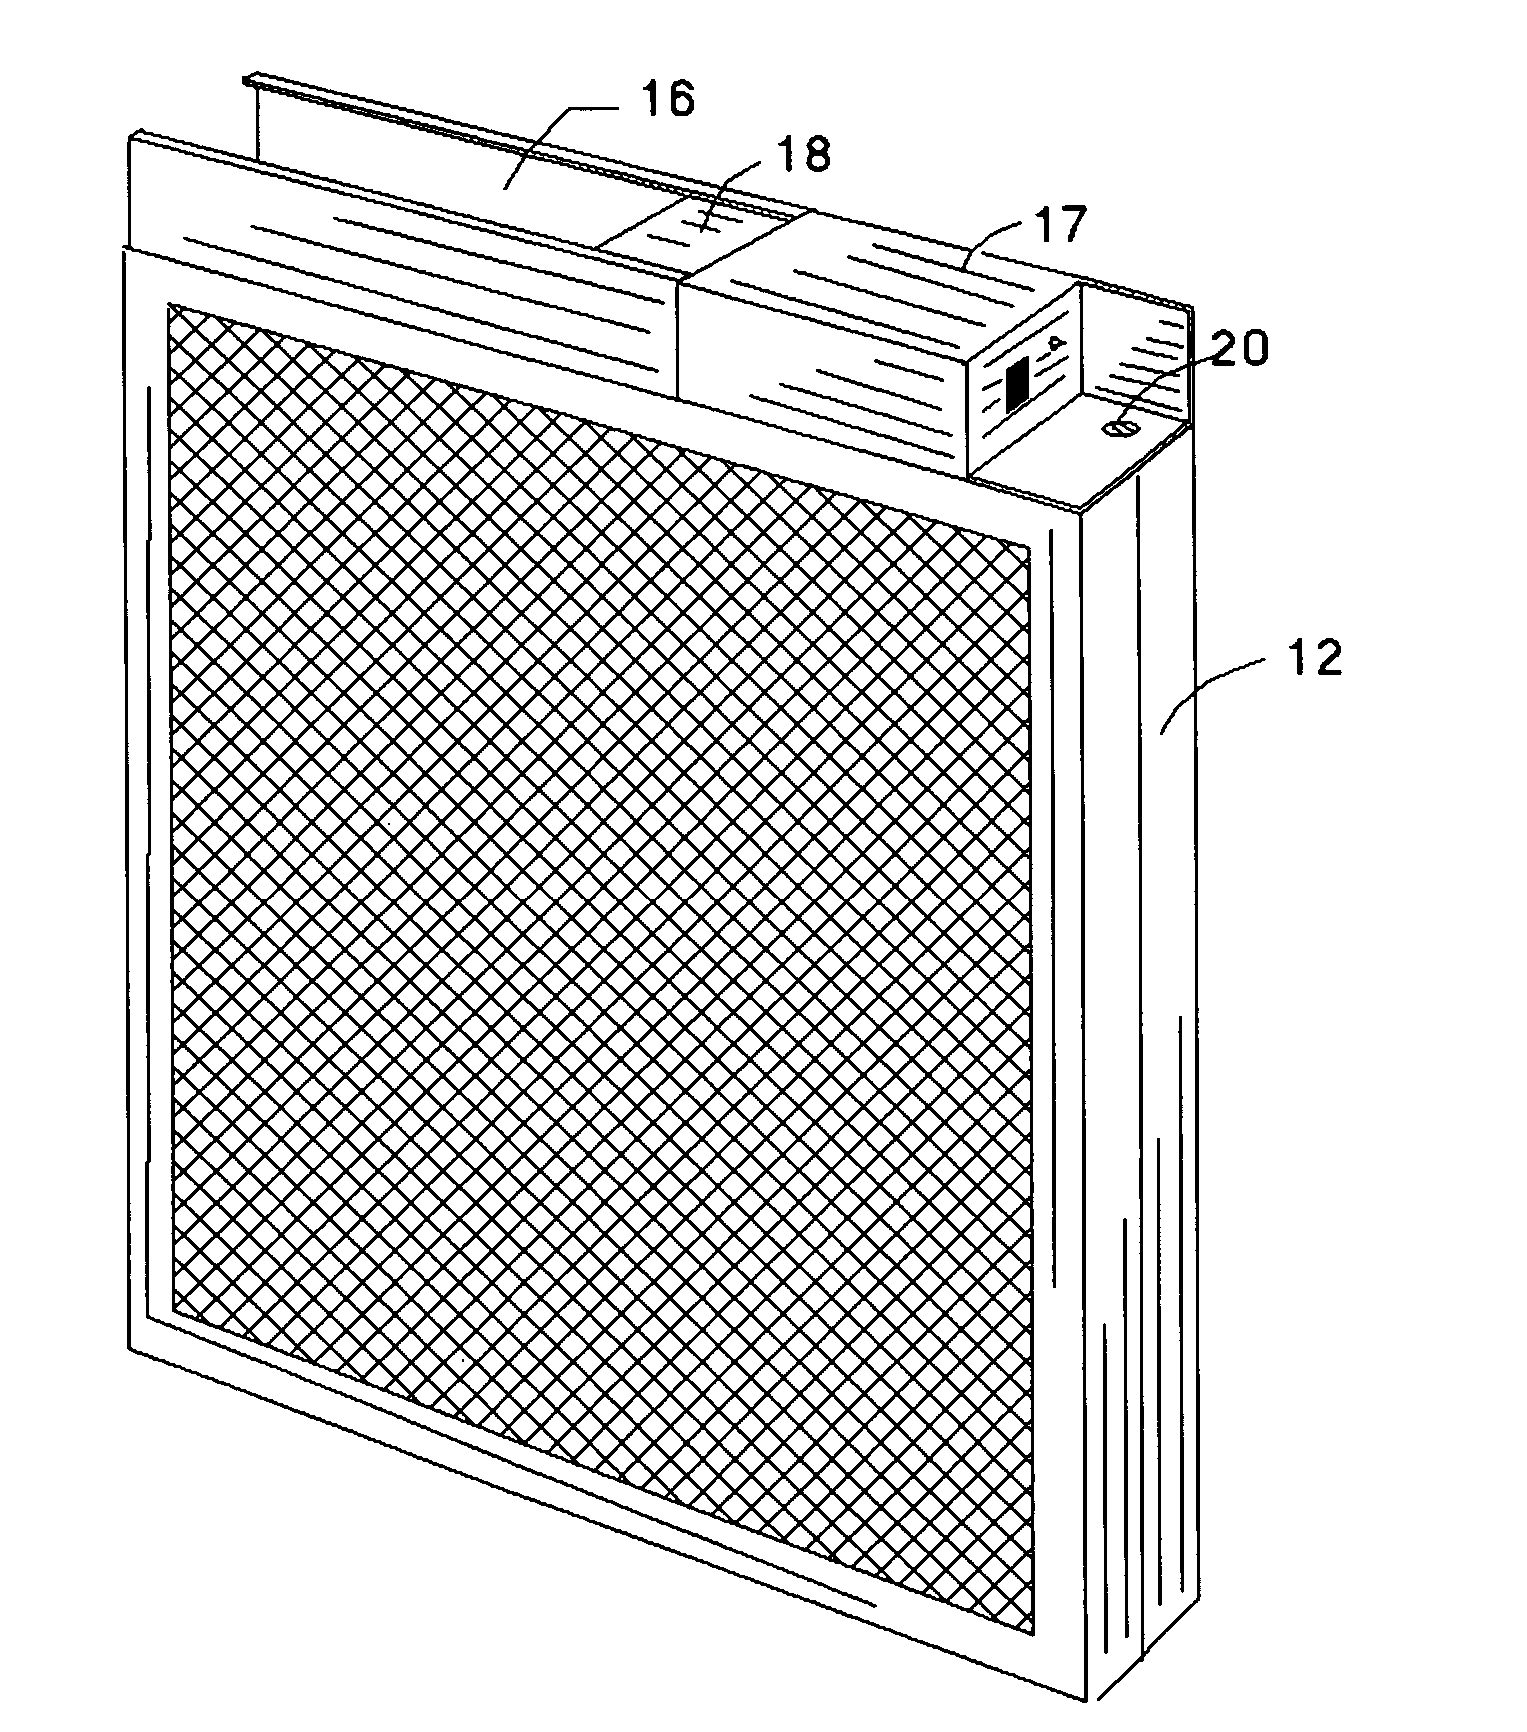 Electronic air filter with resistive screen and electronic modular assembly